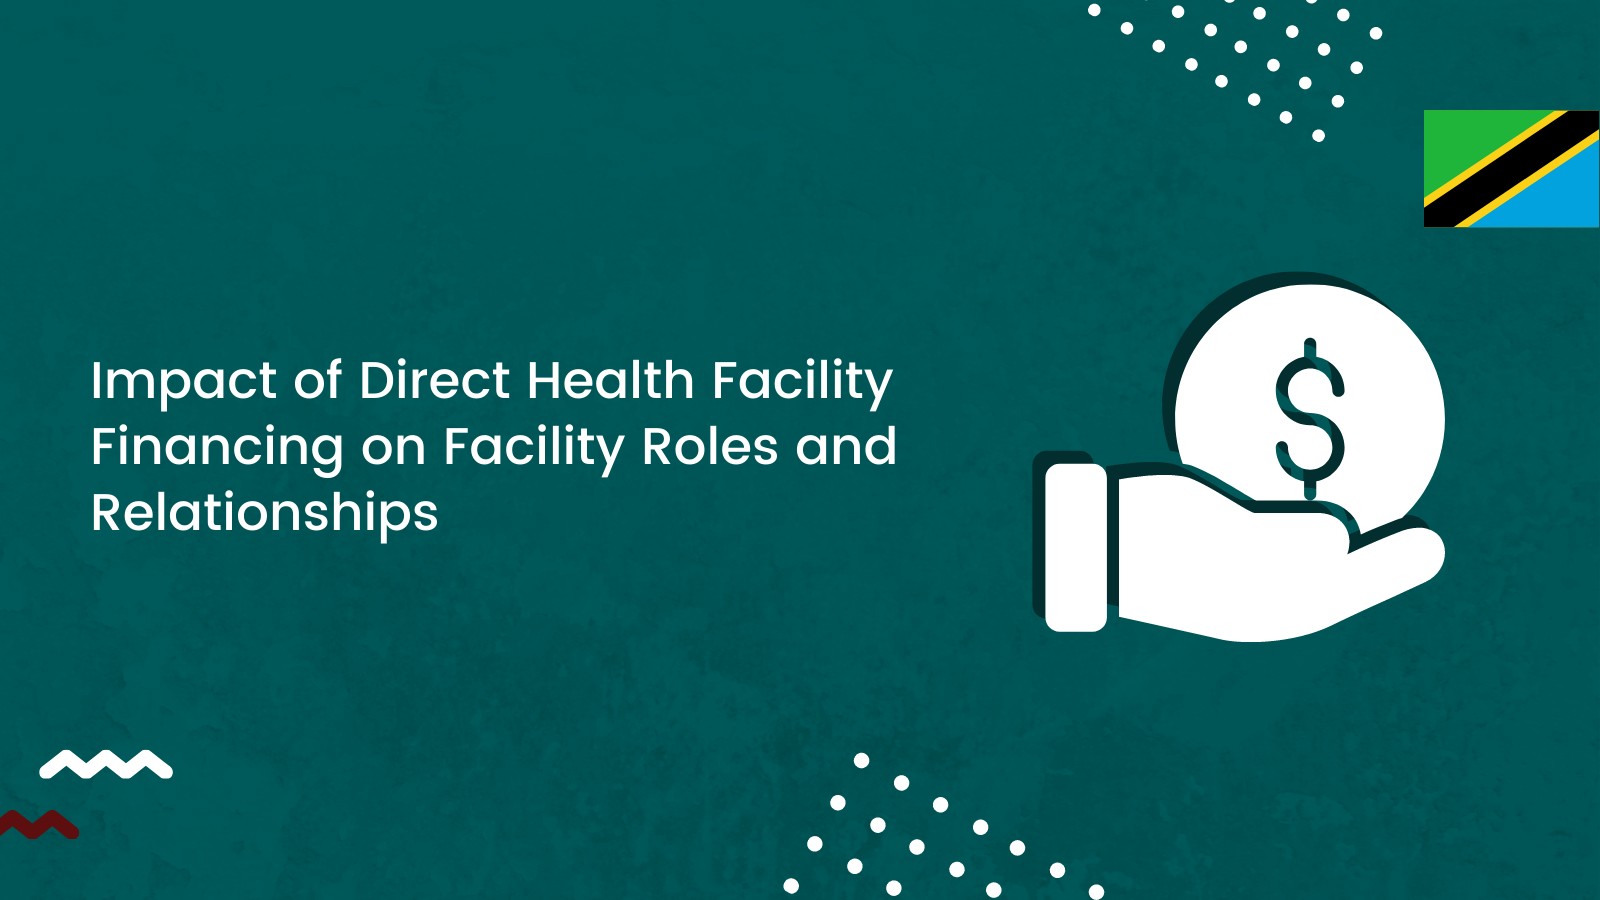 Impact of Direct Health Facility Financing on Facility Roles and Relationships